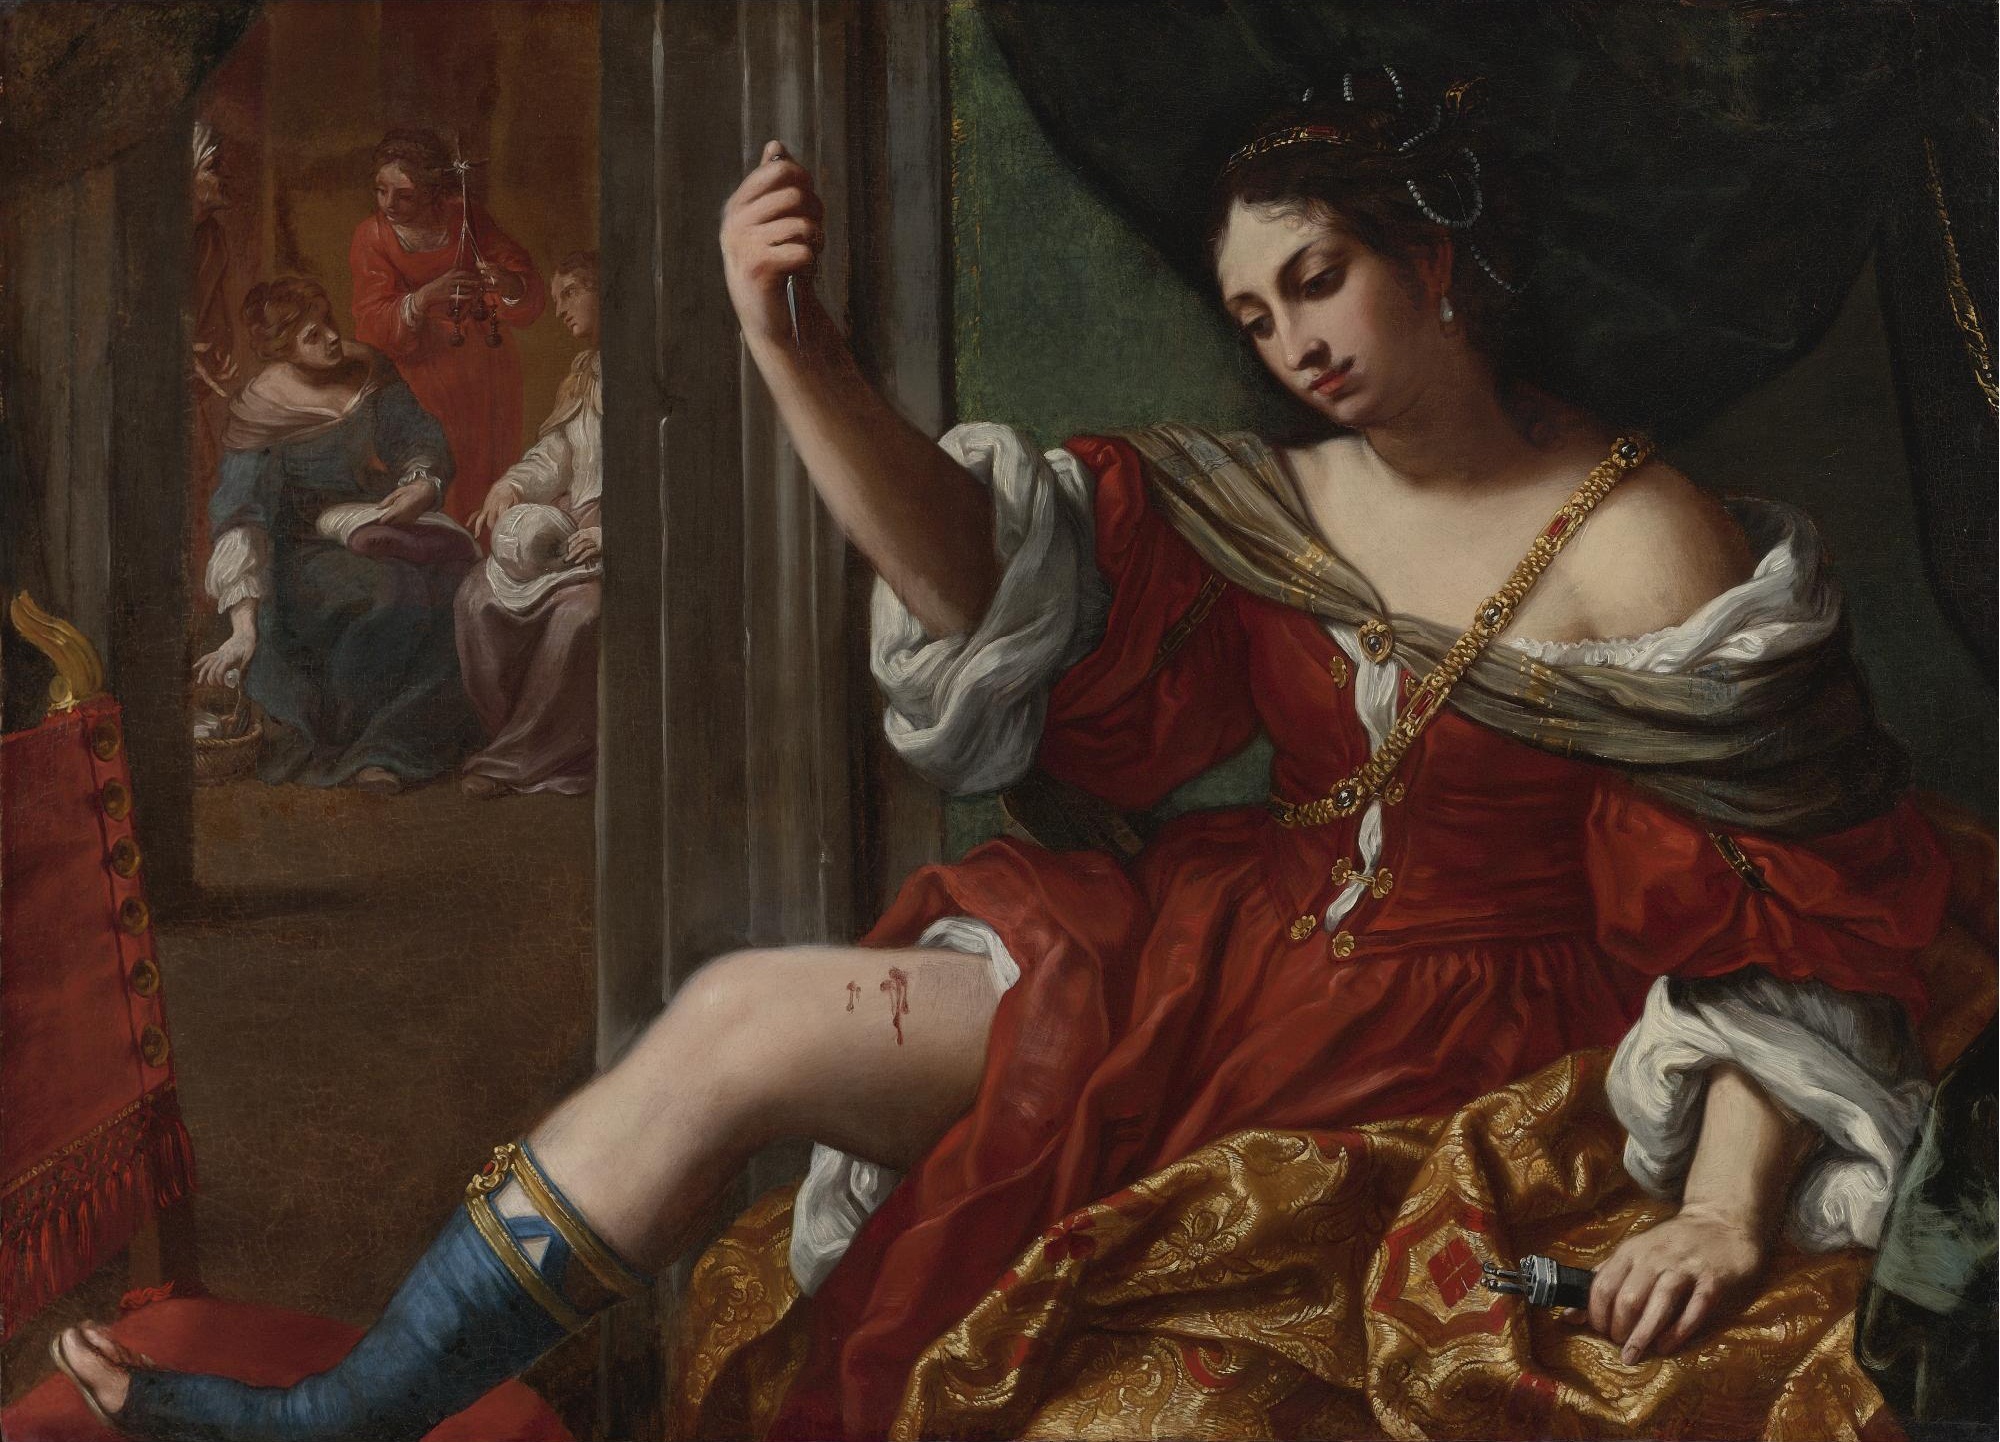 A young woman is seated in an elaborate red and gold dress, embellished with jewels. Her dress is pulled up to expose her right leg and she holds up right hand up. She is stabbing her thigh with a small blade, leaving bleeding wounds on her leg. Through the doorway behind her, we can see three women in the next room having a conversation. They seem unaware of what is happening with the young women in the red and gold dress.